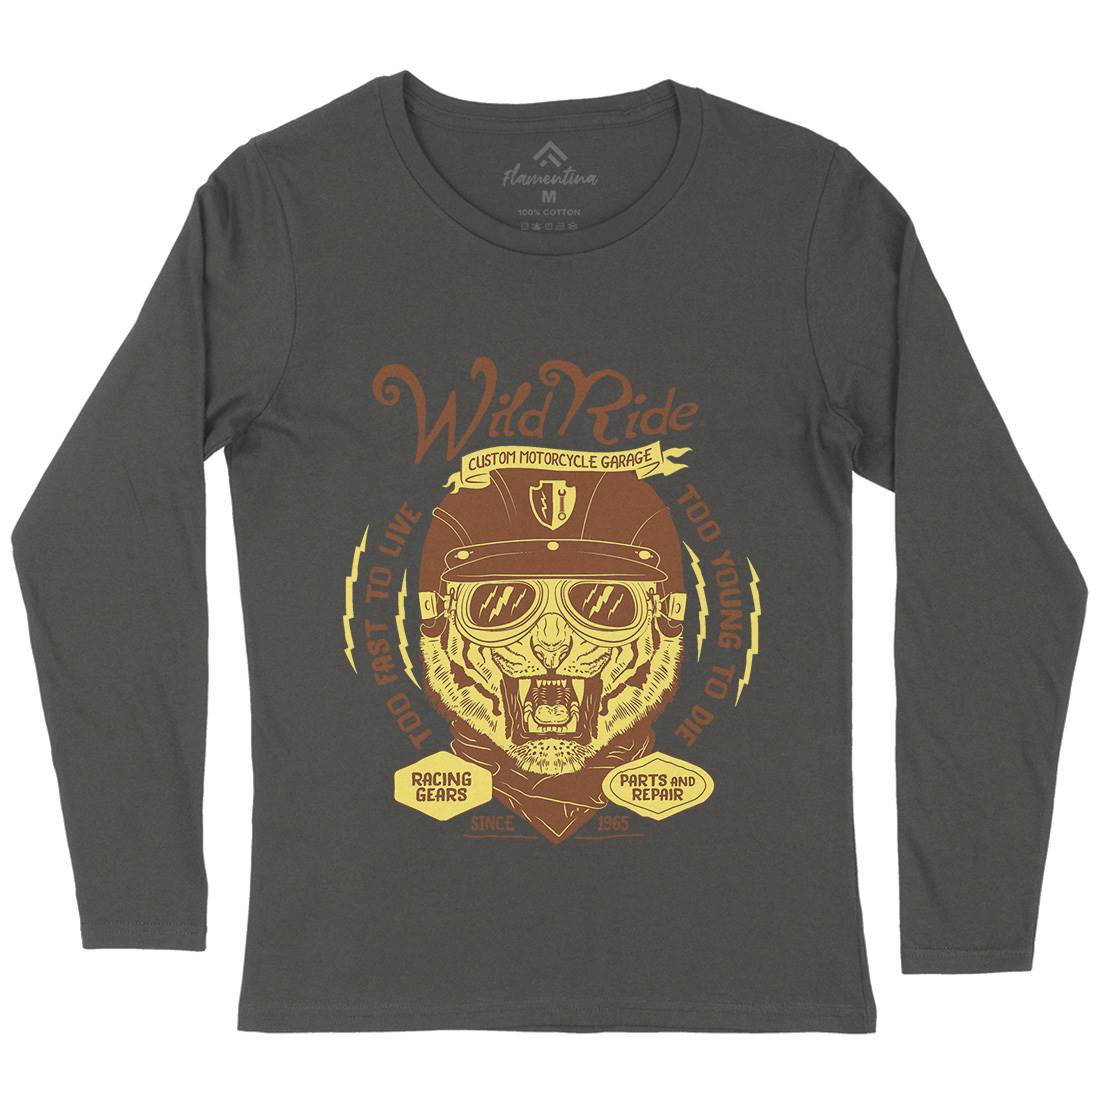 Wild Ride Womens Long Sleeve T-Shirt Motorcycles A996